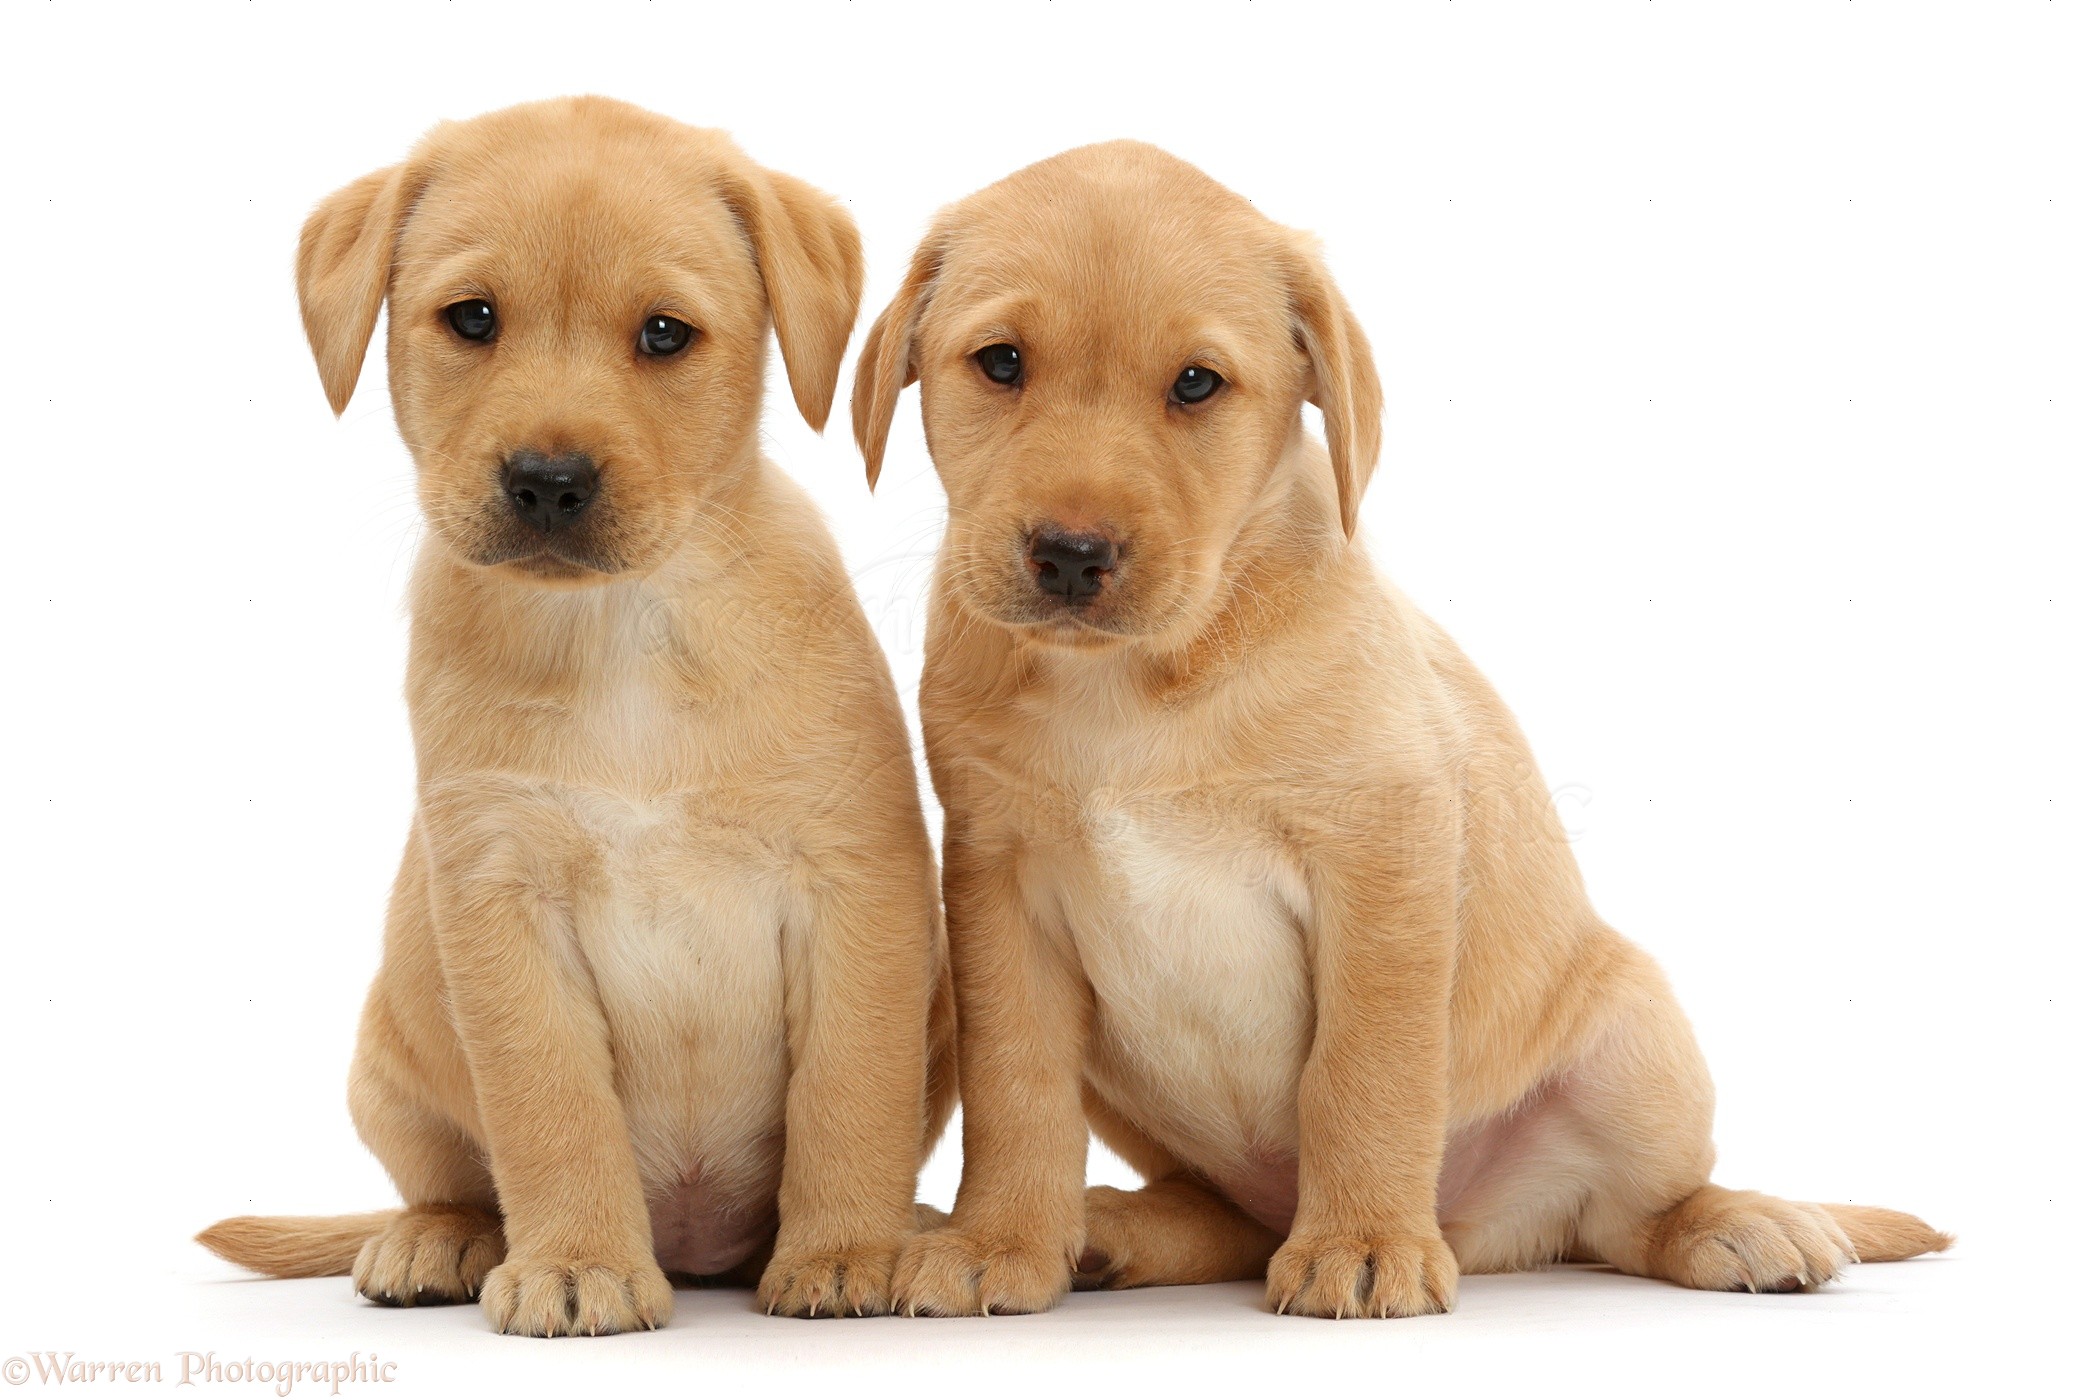 Dogs Two Cute Yellow Labrador Puppies Sitting Together Photo Wp47575